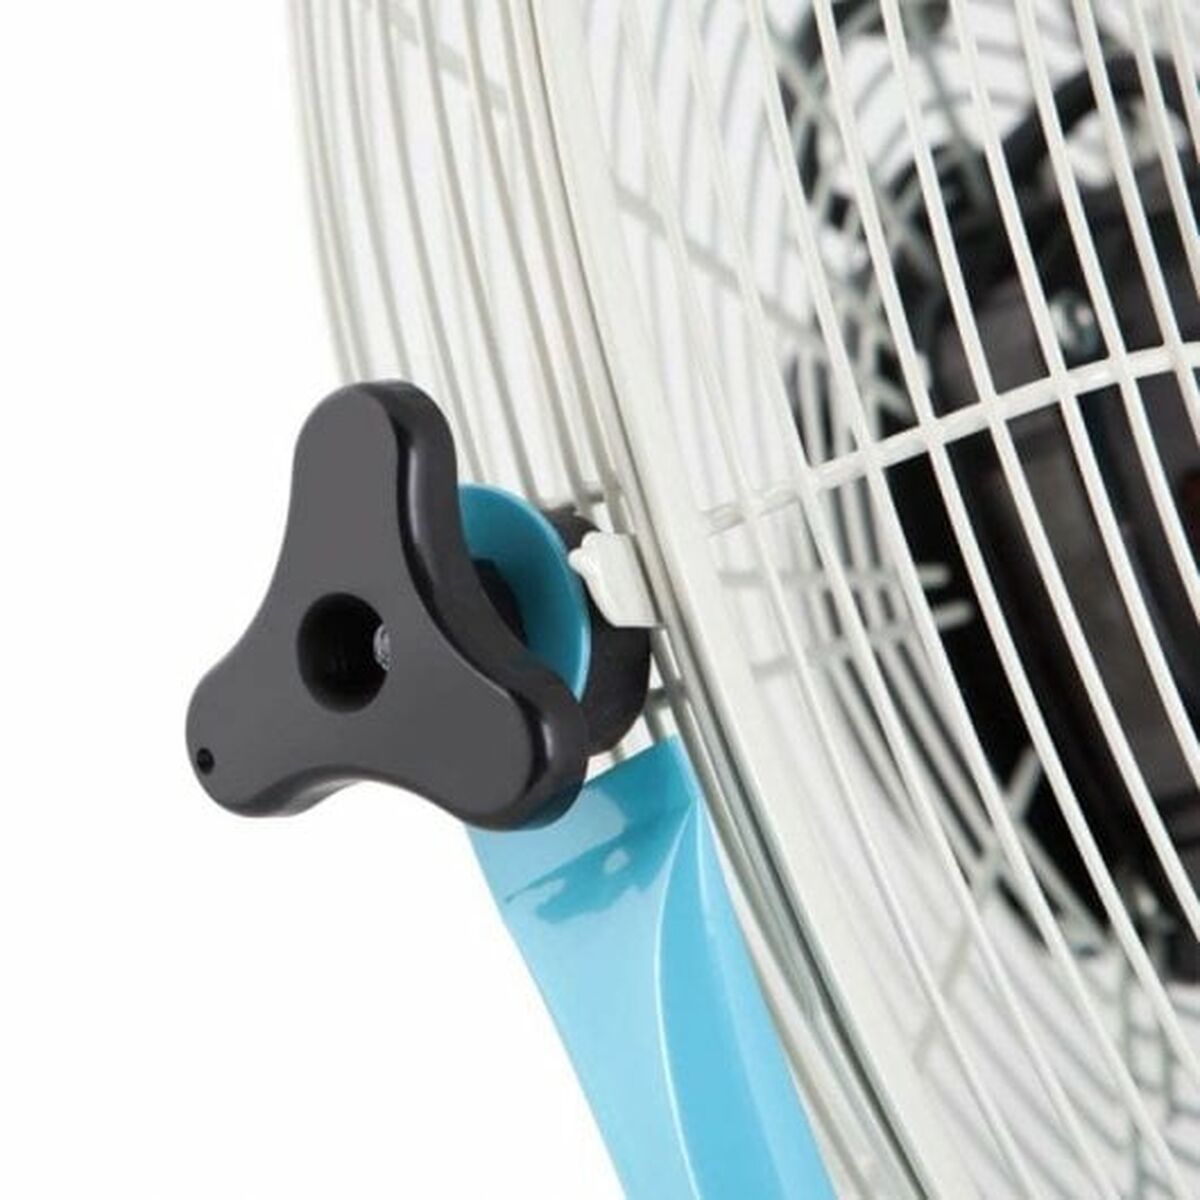 Table Fan Orbegozo PW 1546 130 W, Orbegozo, Home and cooking, Portable air conditioning, table-fan-orbegozo-pw-1546-130-w, Brand_Orbegozo, category-reference-2399, category-reference-2450, category-reference-2451, category-reference-t-19656, category-reference-t-21087, category-reference-t-25217, category-reference-t-29129, Condition_NEW, ferretería, Price_50 - 100, summer, RiotNook